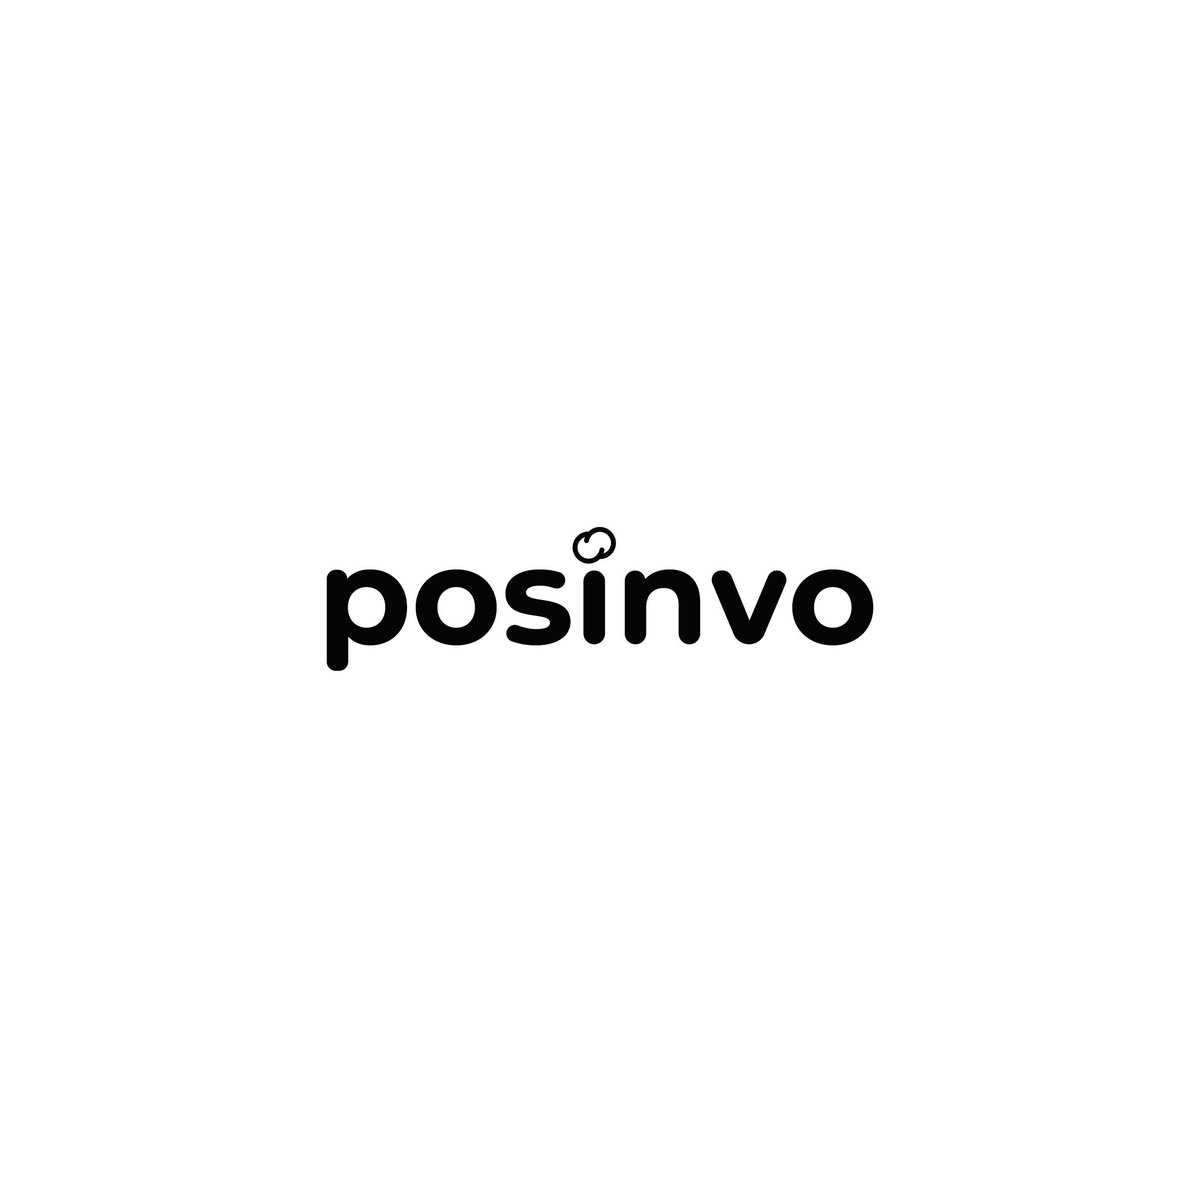 Logo Design for POSINVO A cloud based management solution app that seeks to help SMEs and vendors compile and analyse their business data.Swipe Left  #logodesign  #gradients #Designer